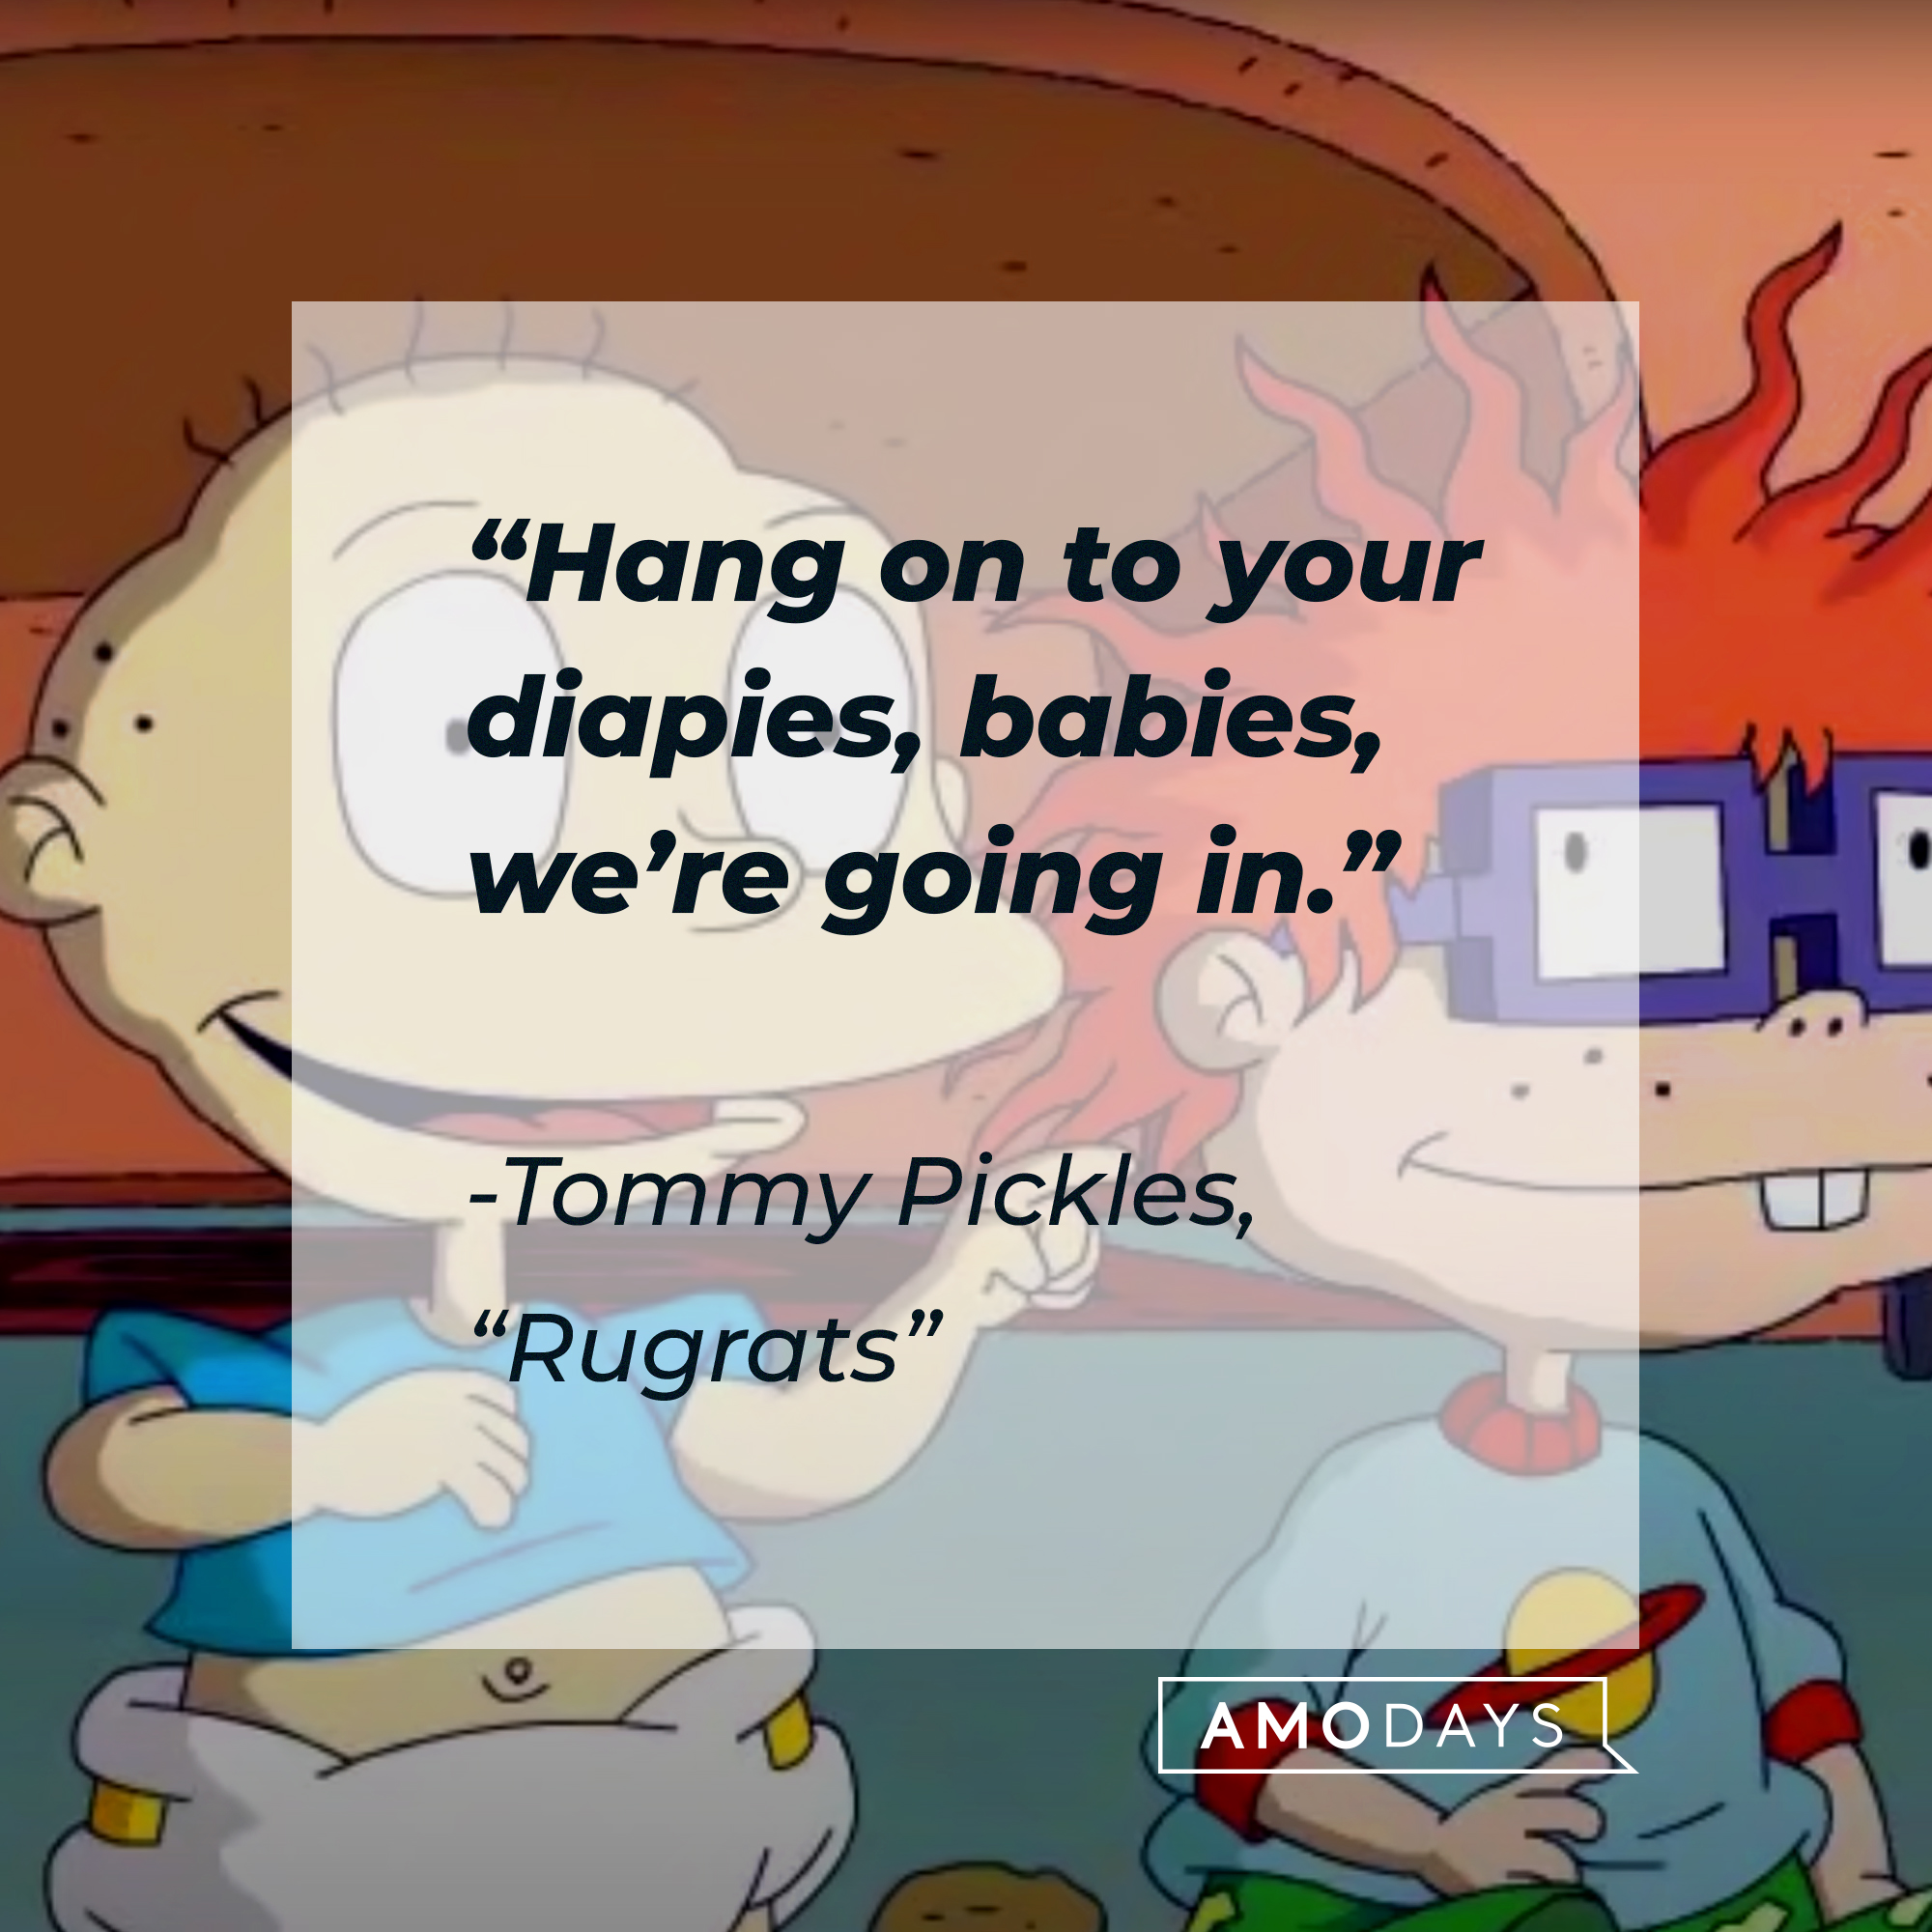 Tommy Pickes with his quote: “Hang on to your diapies, babies, we’re going in.” | Source: Facebook.com/Rugrats